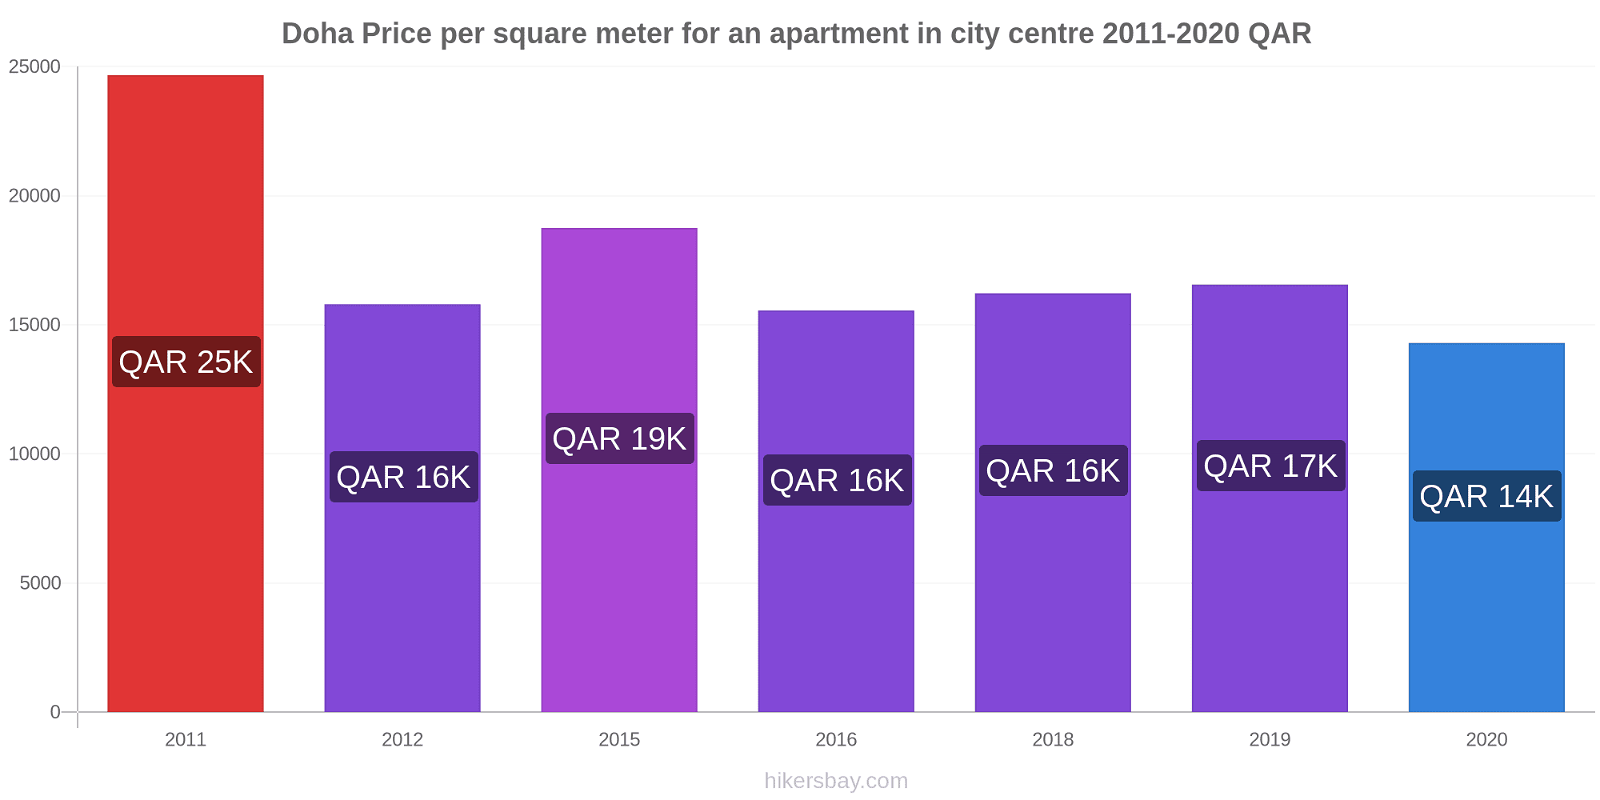 Doha price changes Price per square meter for an apartment in city centre hikersbay.com